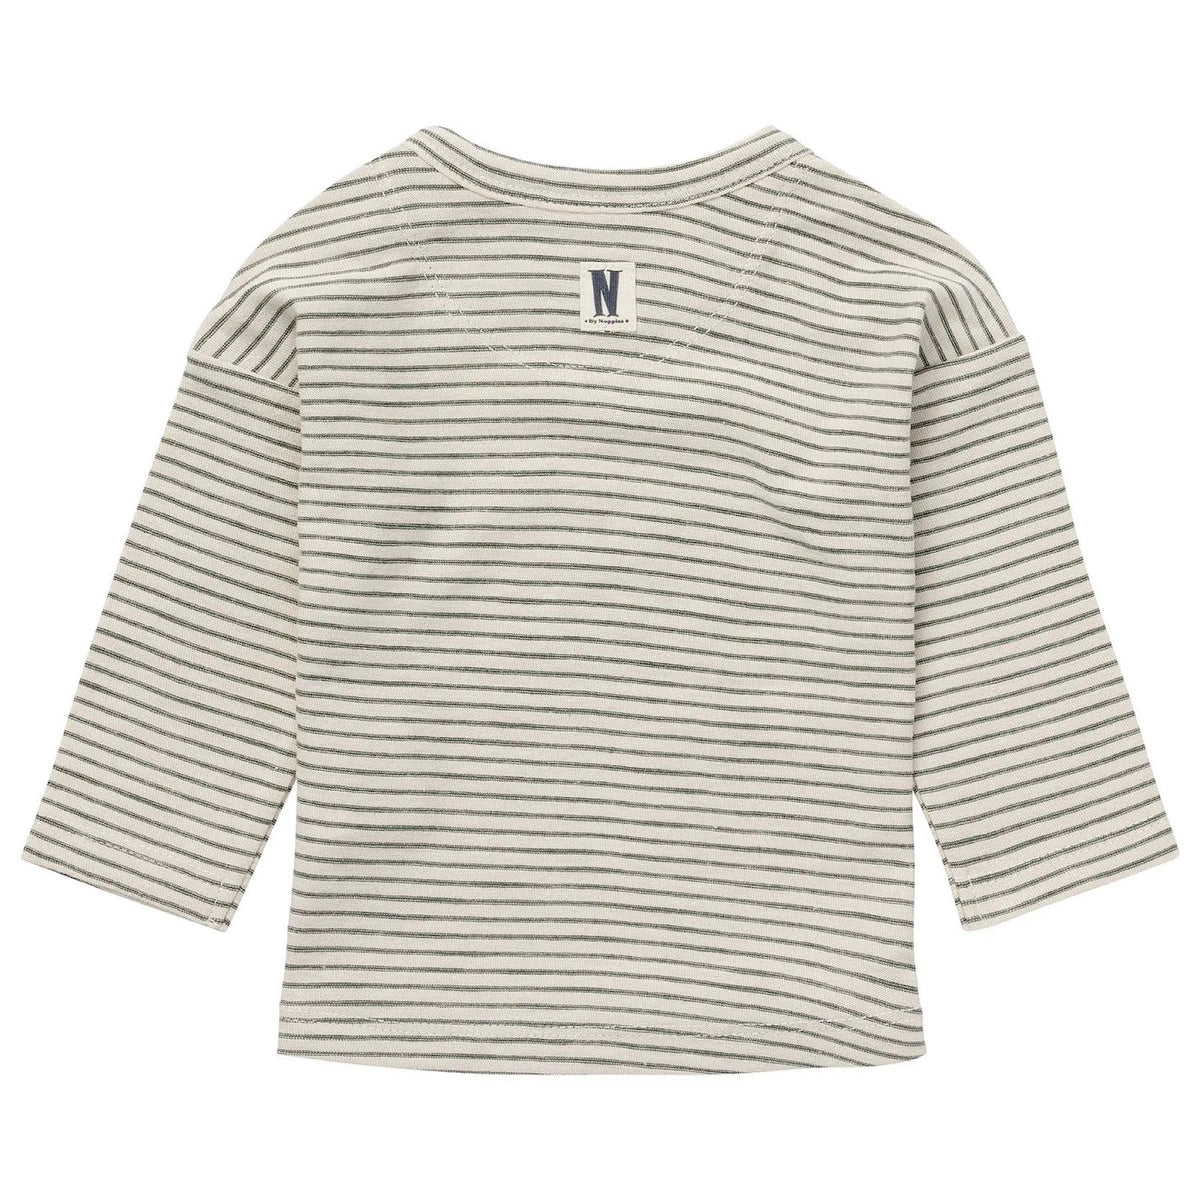 Enjoy The Moment Striped Long Sleeve Tee